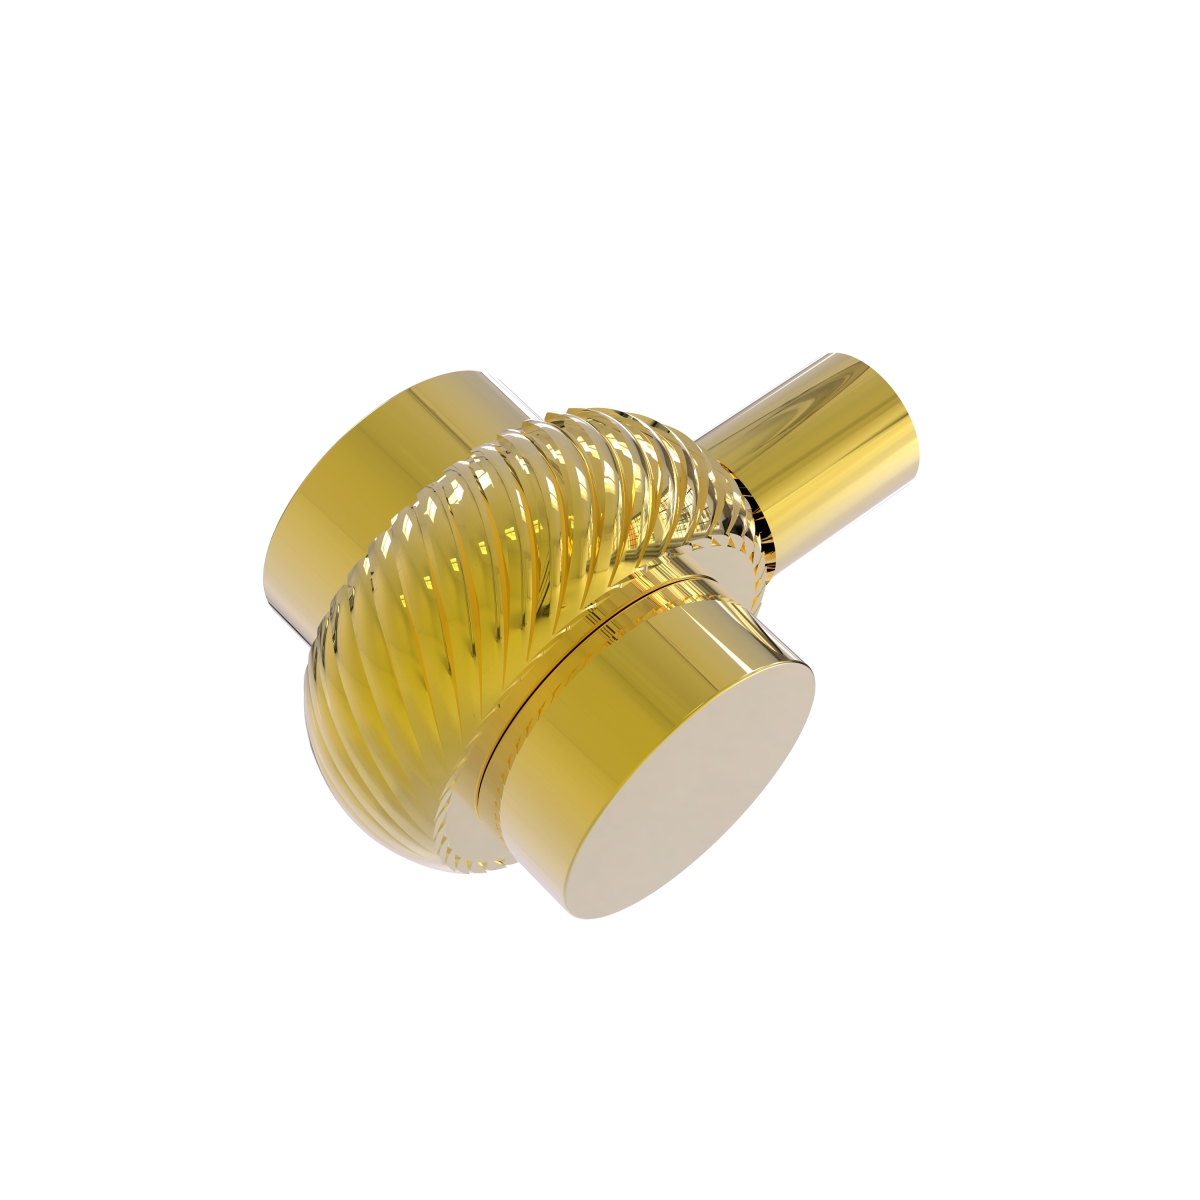 102t-unl 1.5 X 1.5 X 1.5 In. Cabinet Knob With Twist Ring, Unlacquered Brass